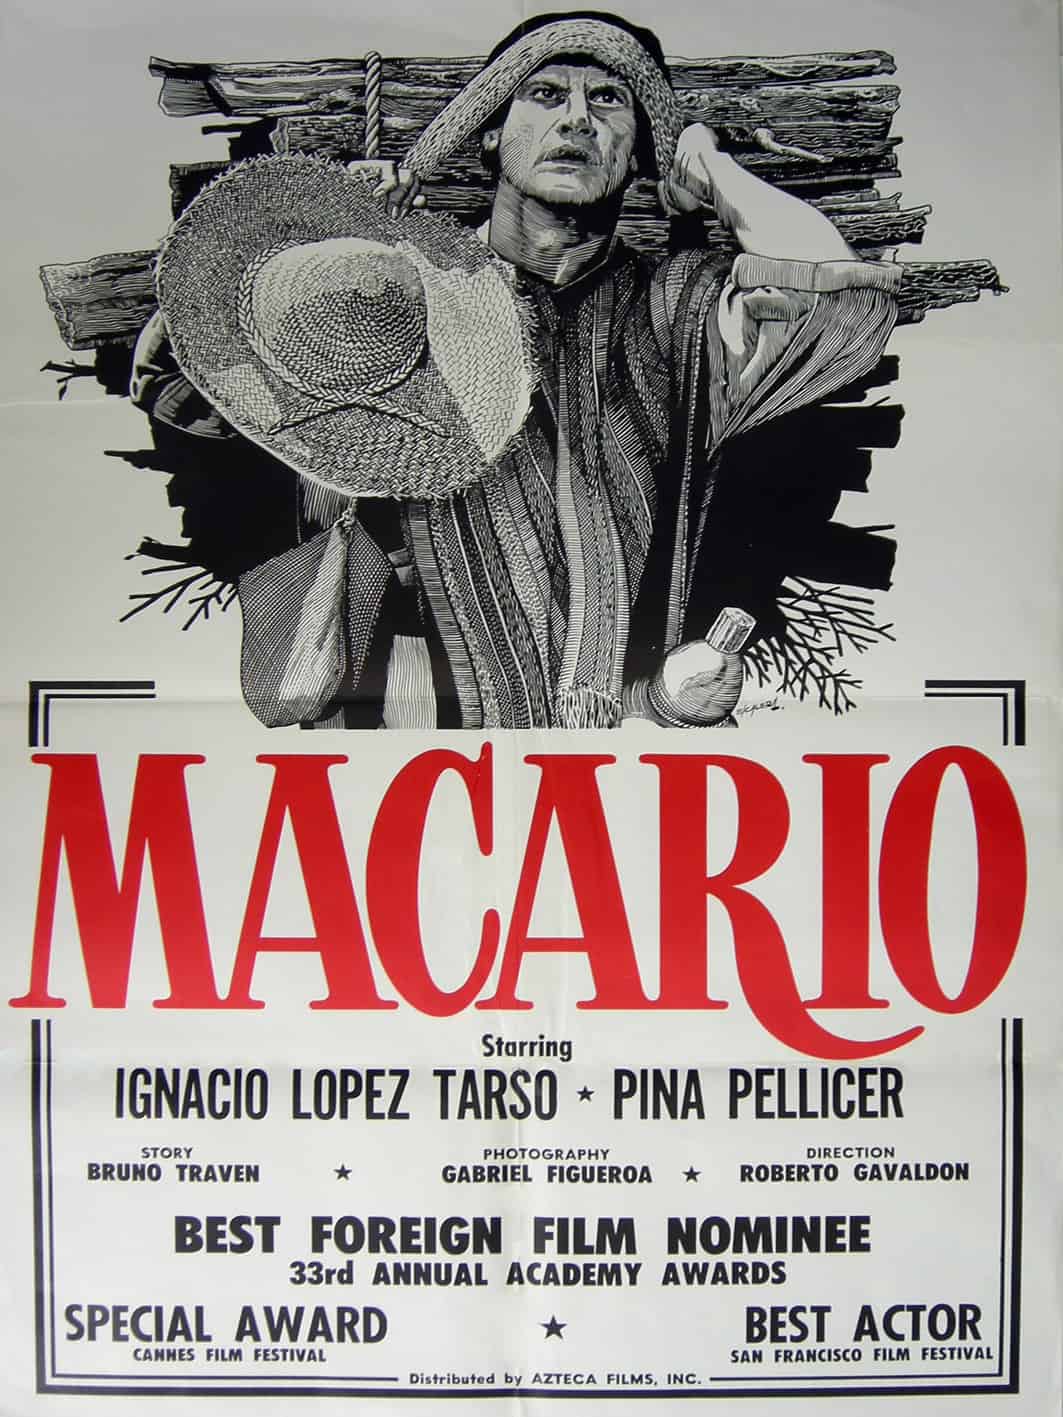 A poster for the film 'Macario'